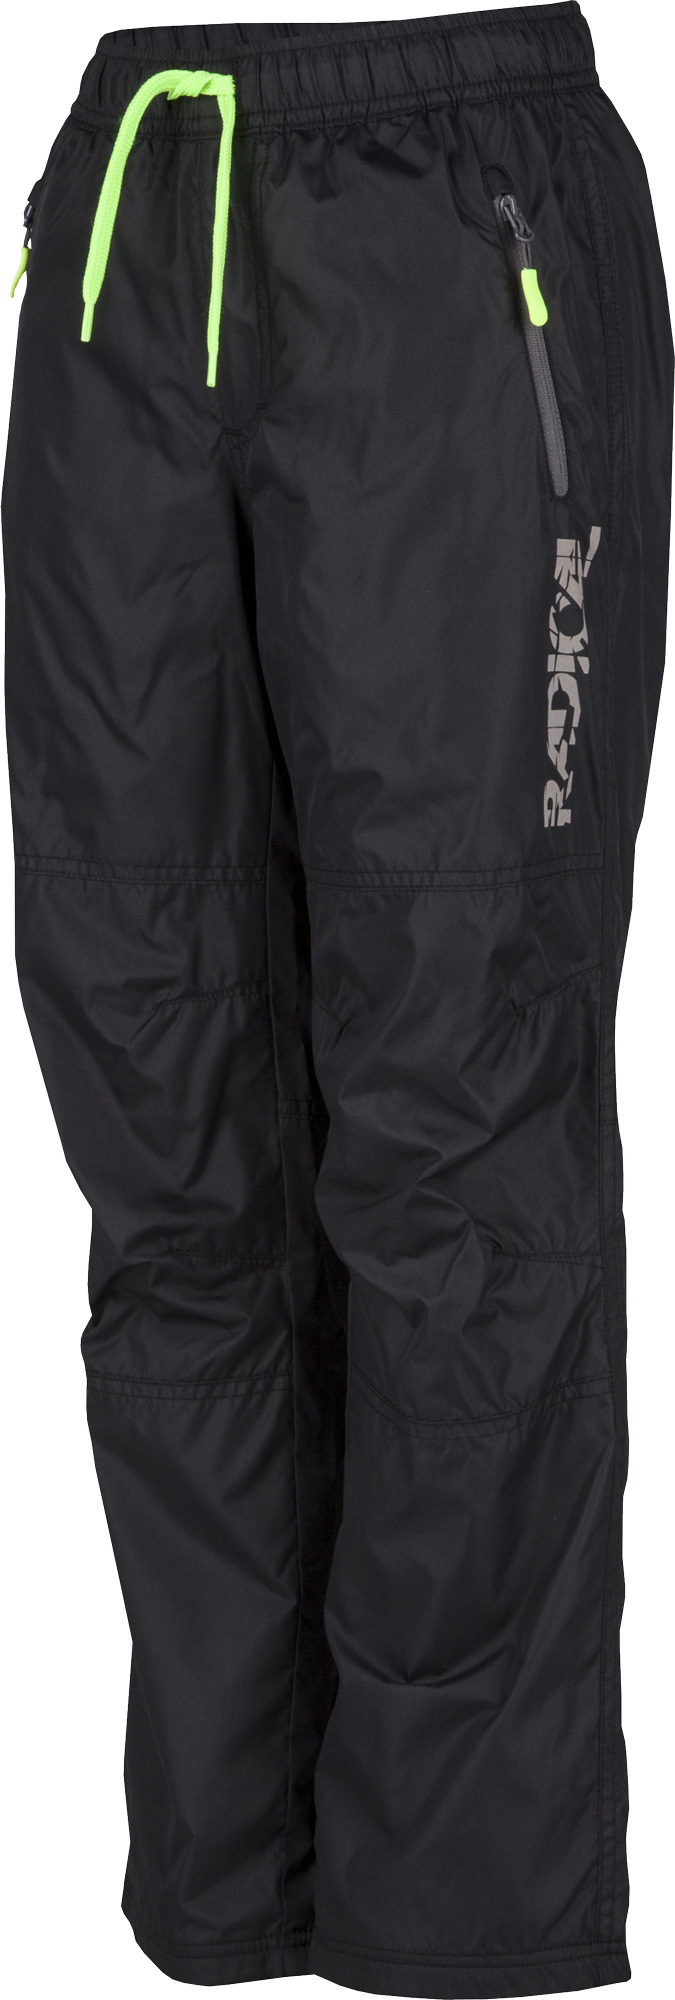 Insulated kids’ trousers